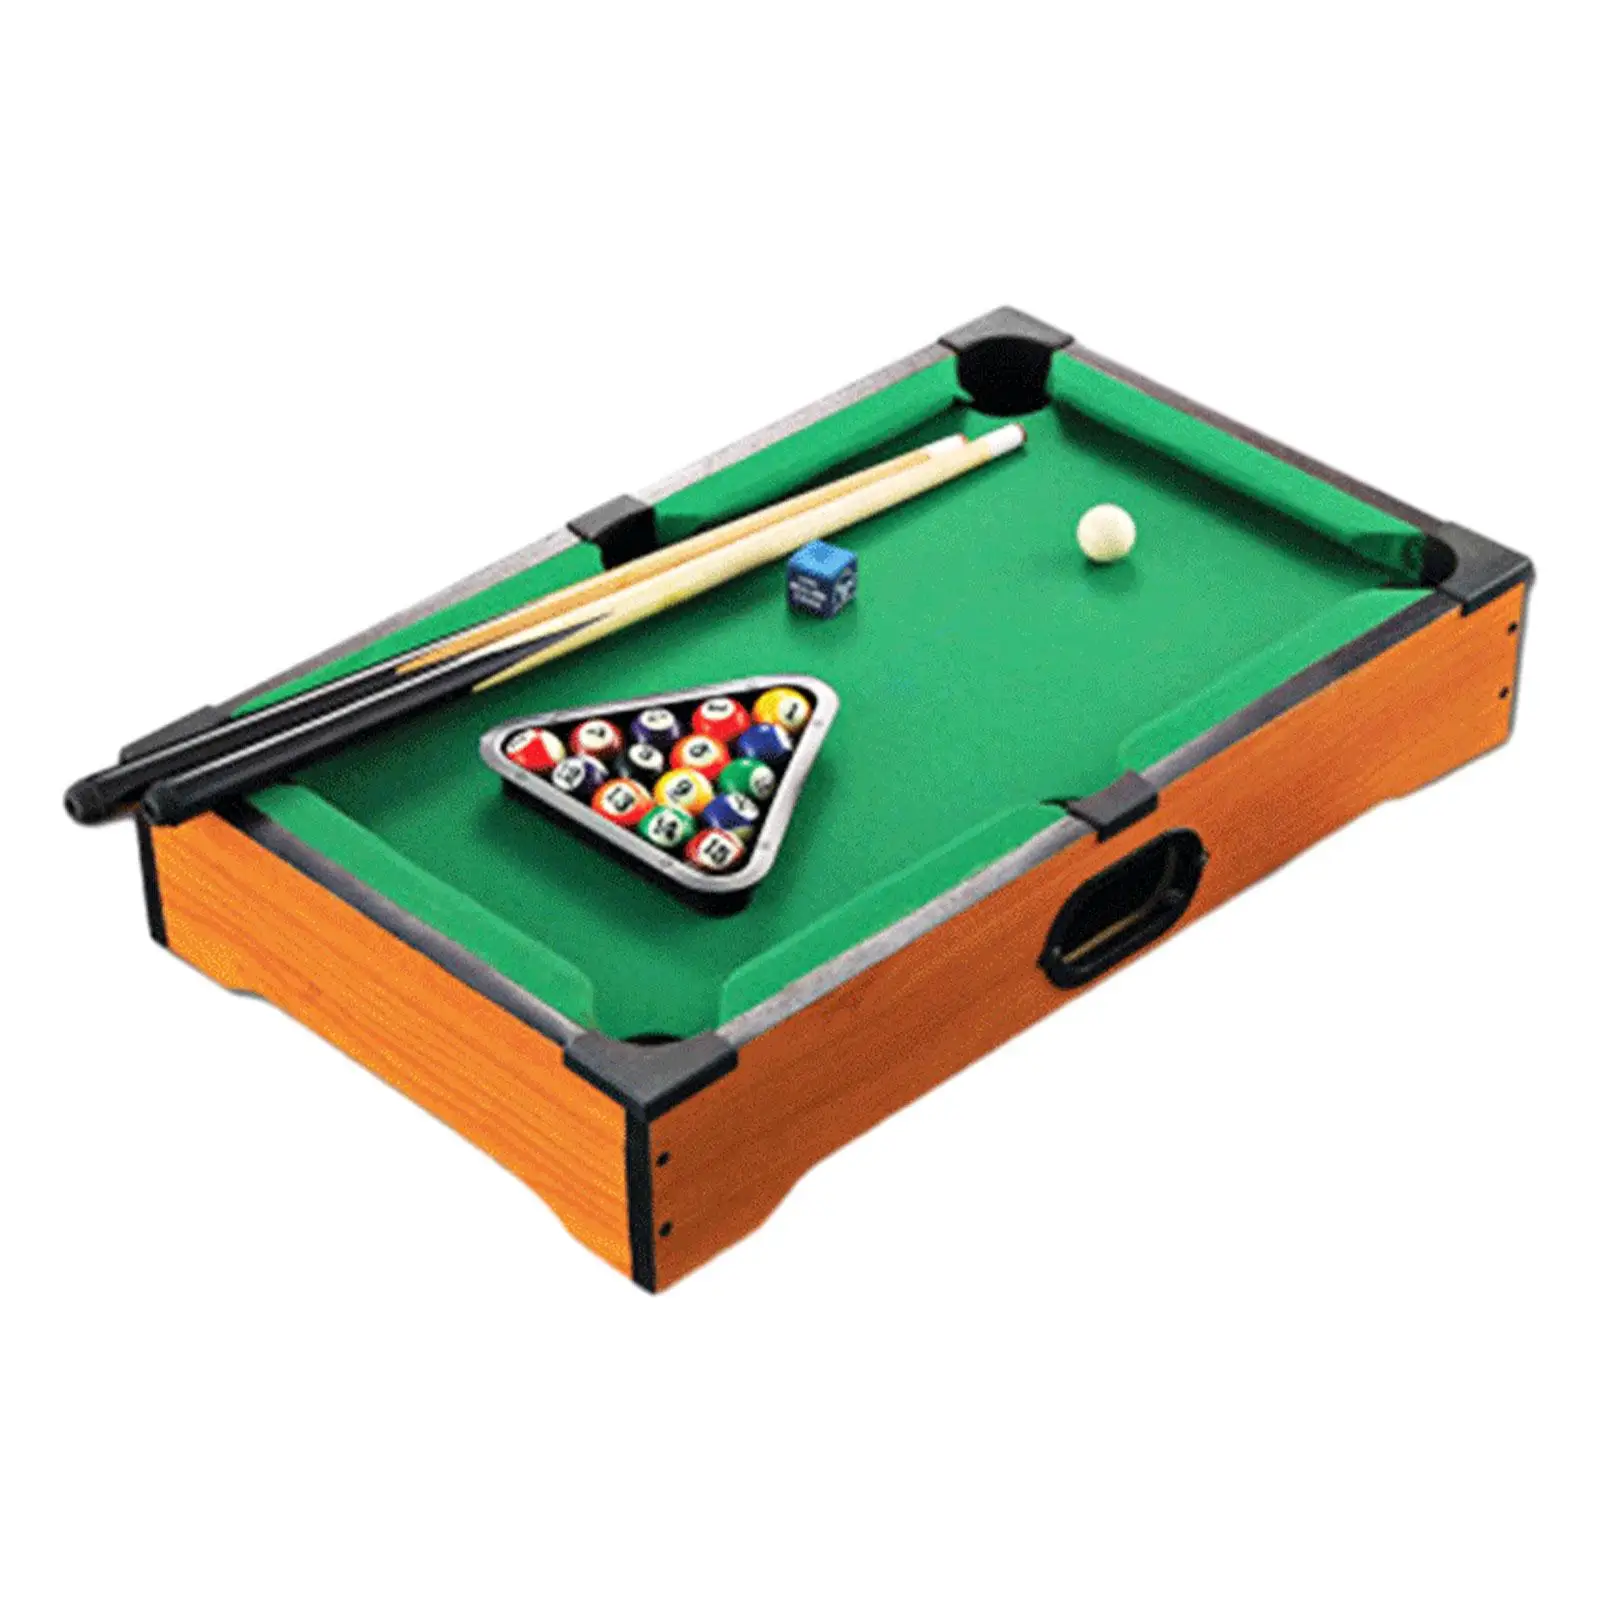 Mini Table Pool Set Easy to Install Wooden for Living Room Desktop Playhouse